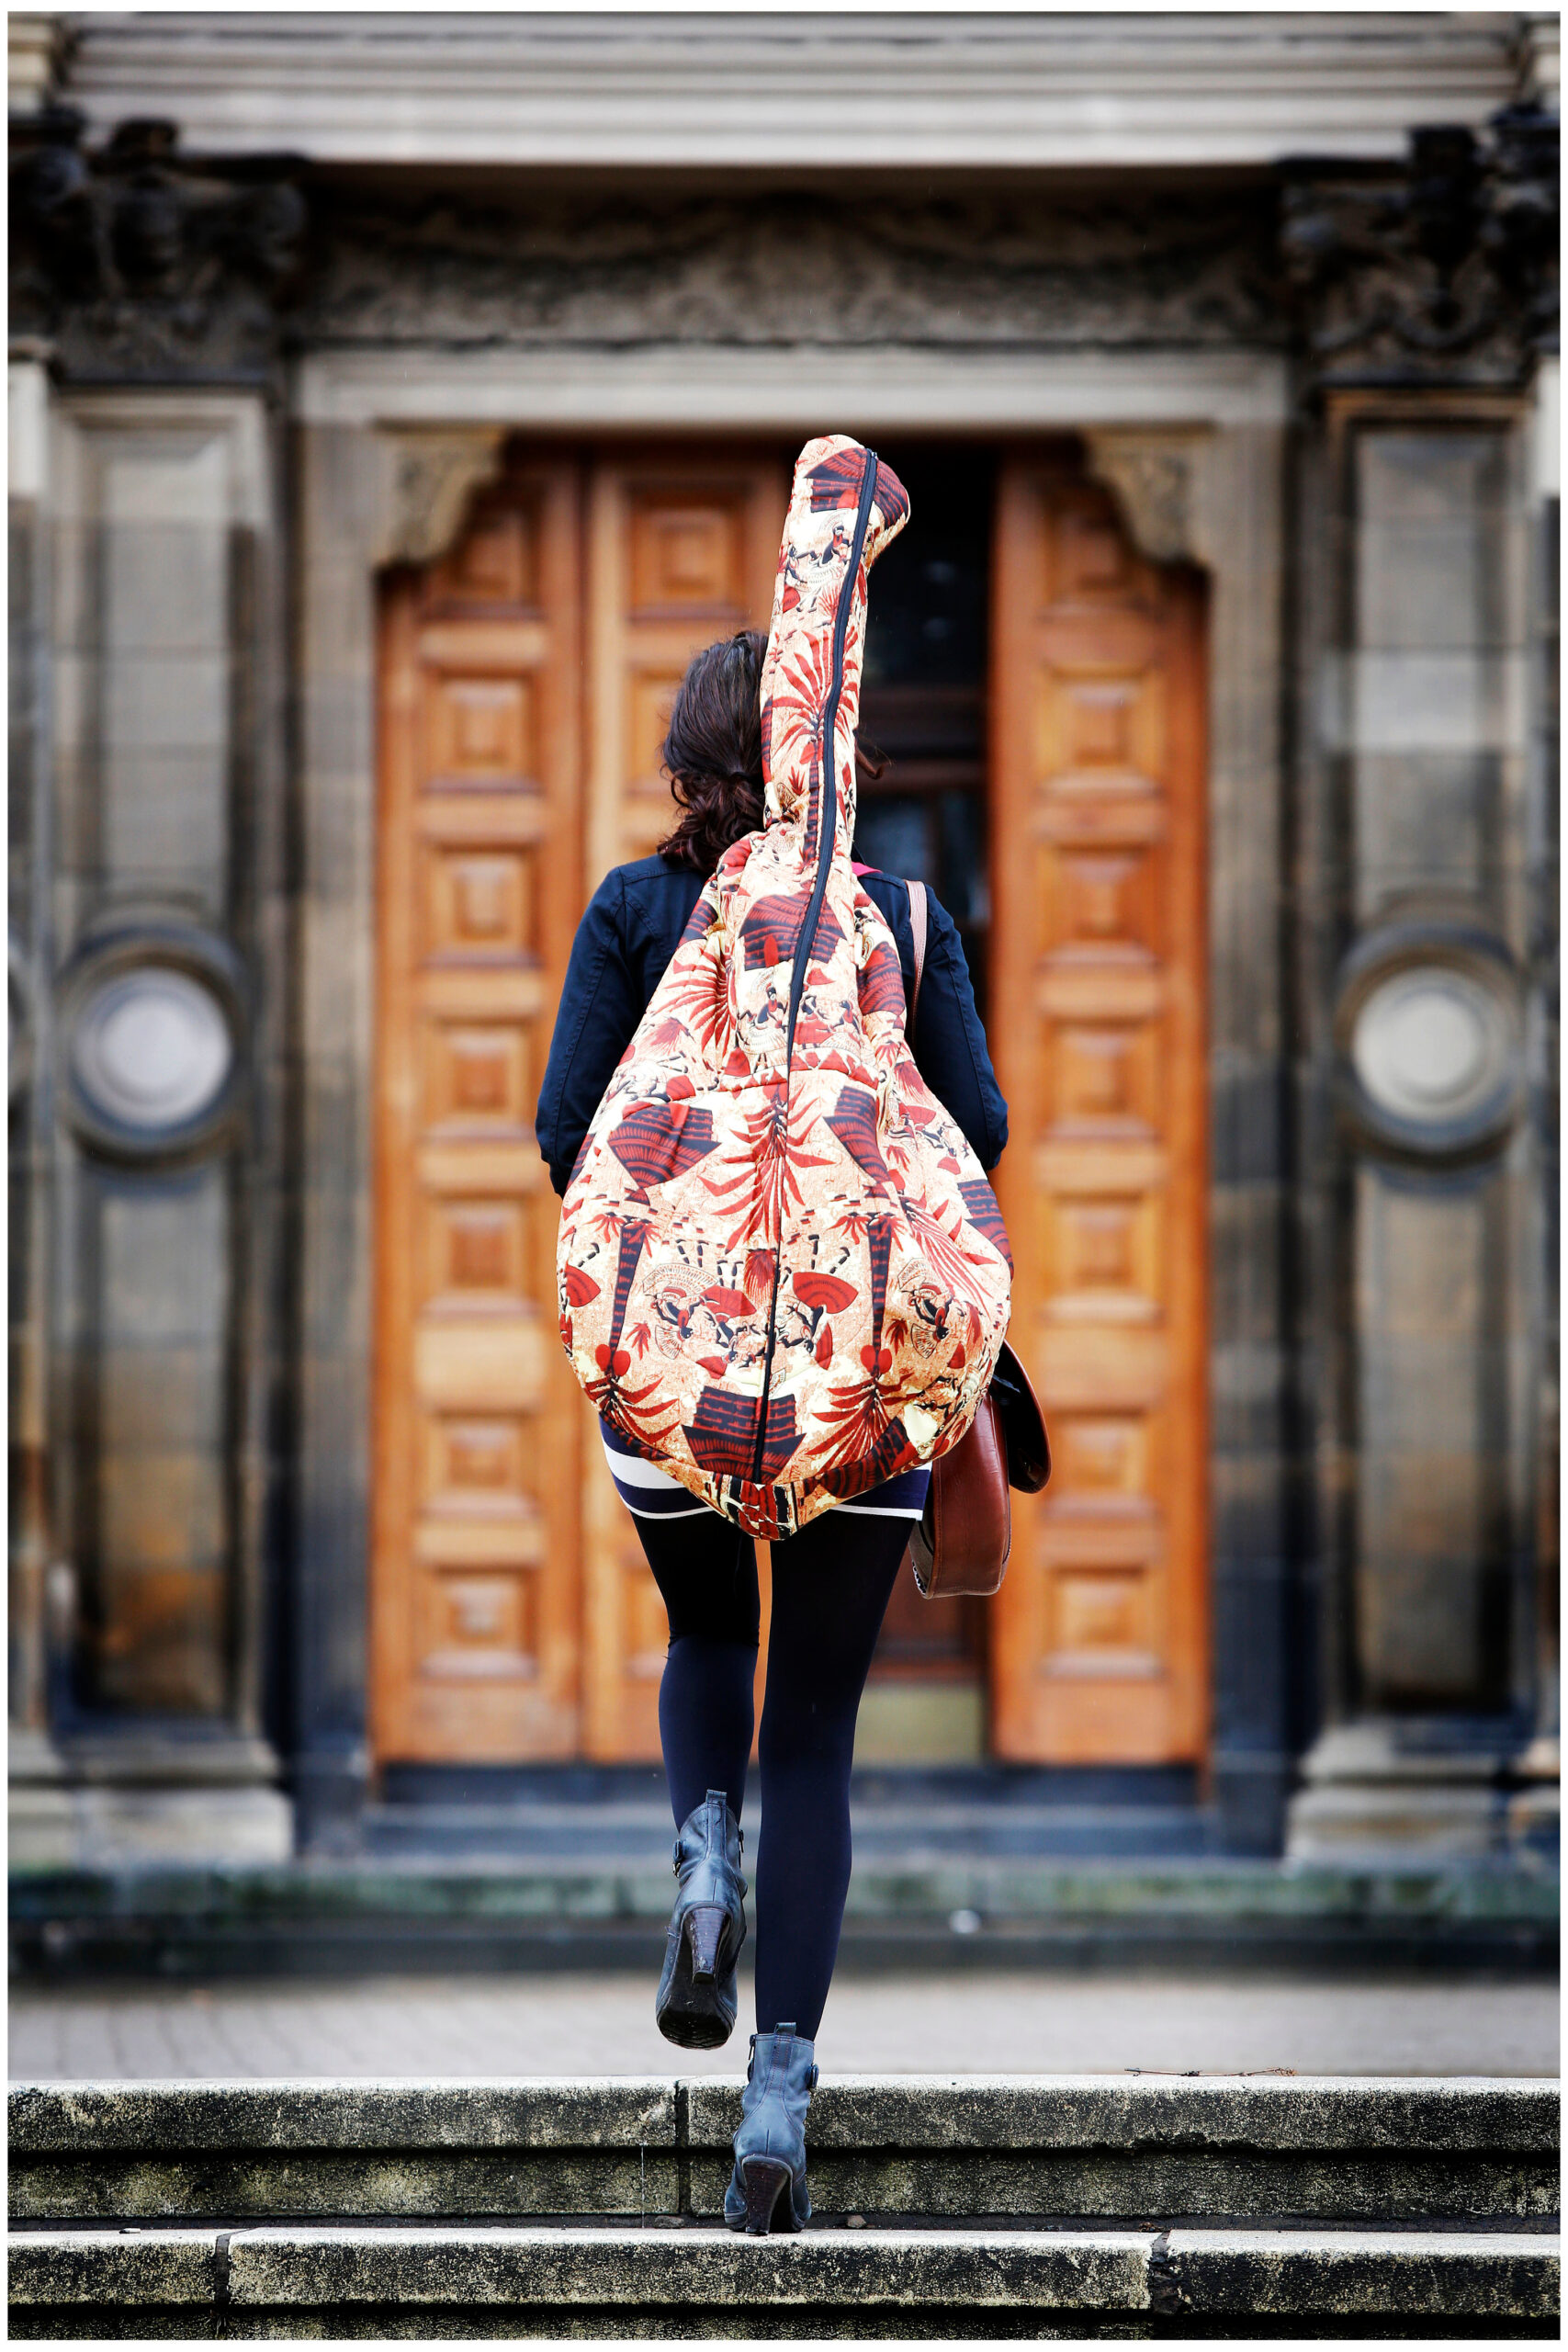 A Music student carries her guitar.